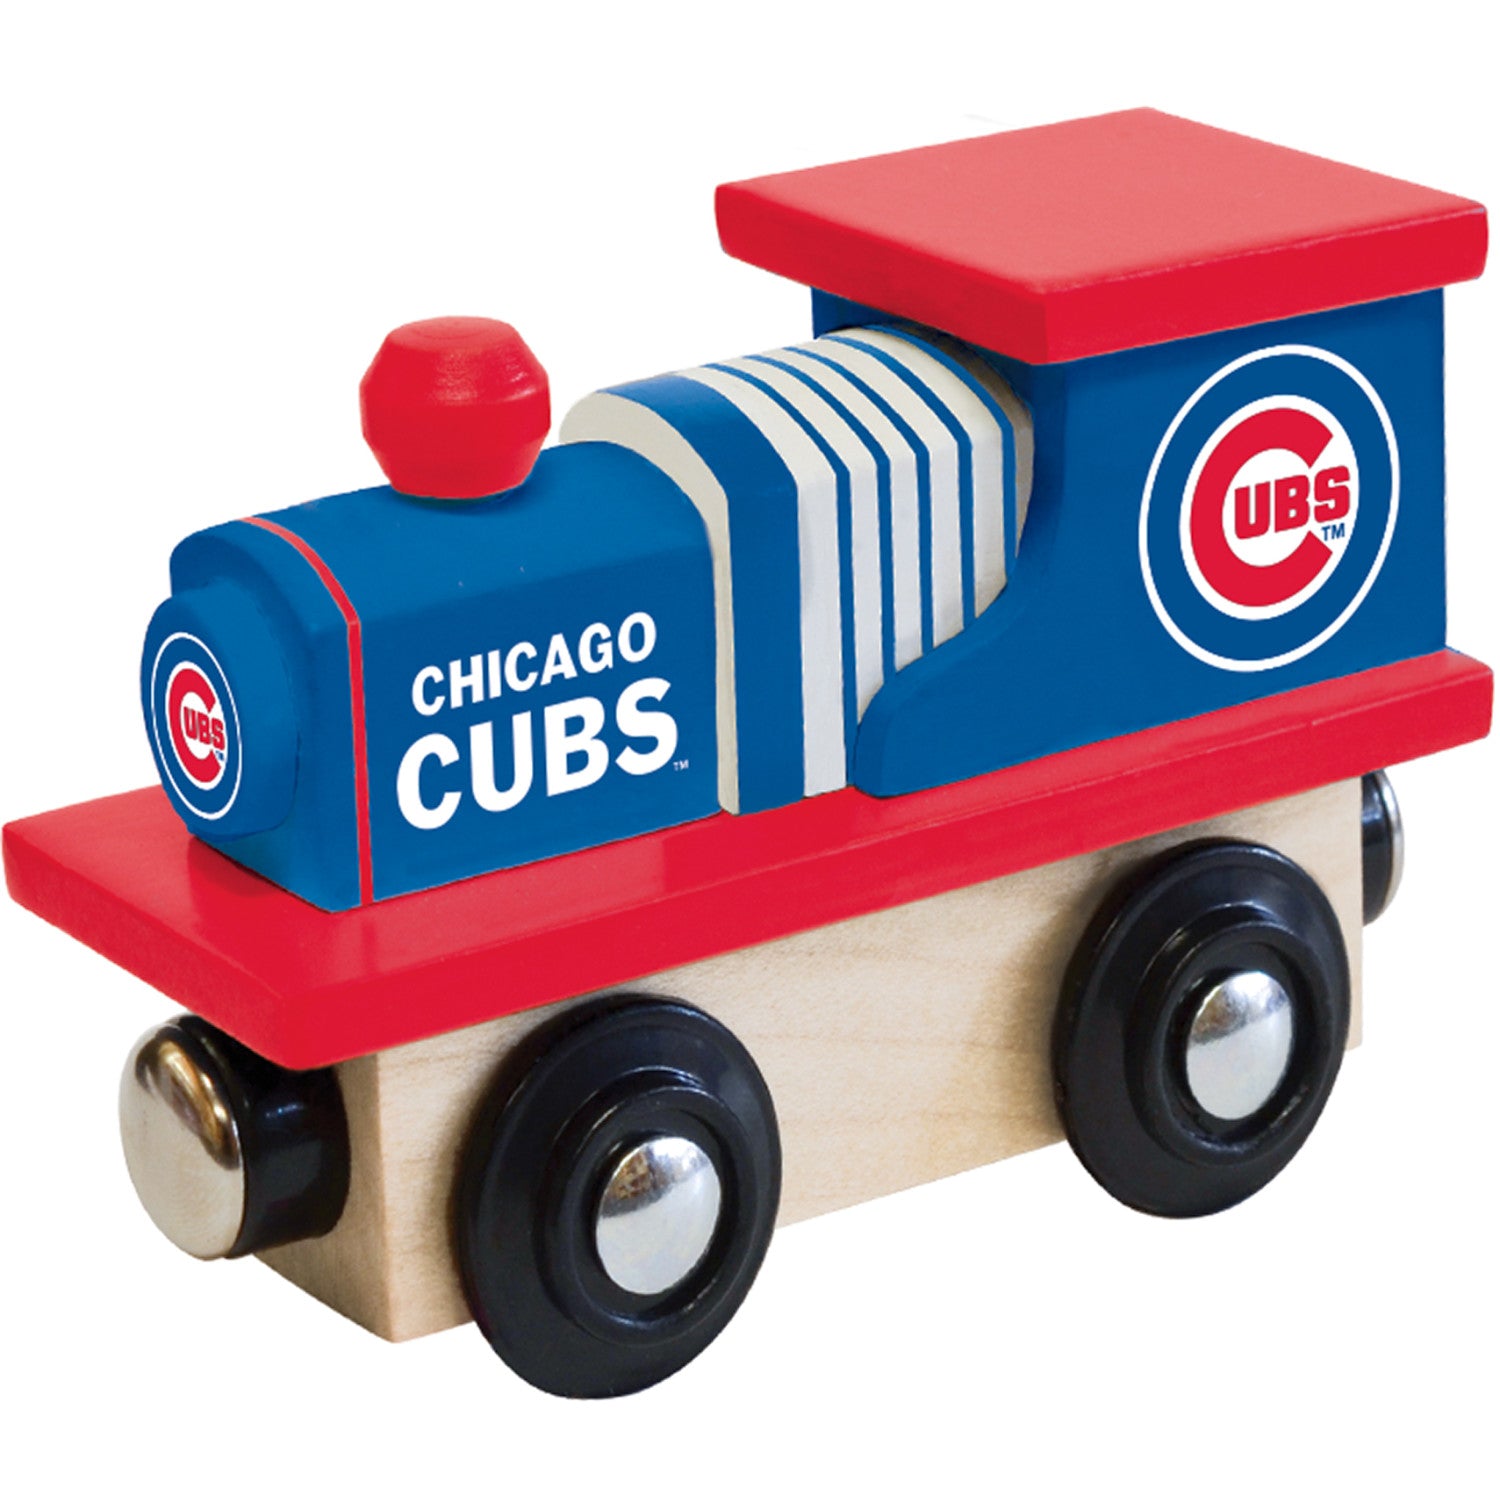 Chicago Cubs Toy Train Engine